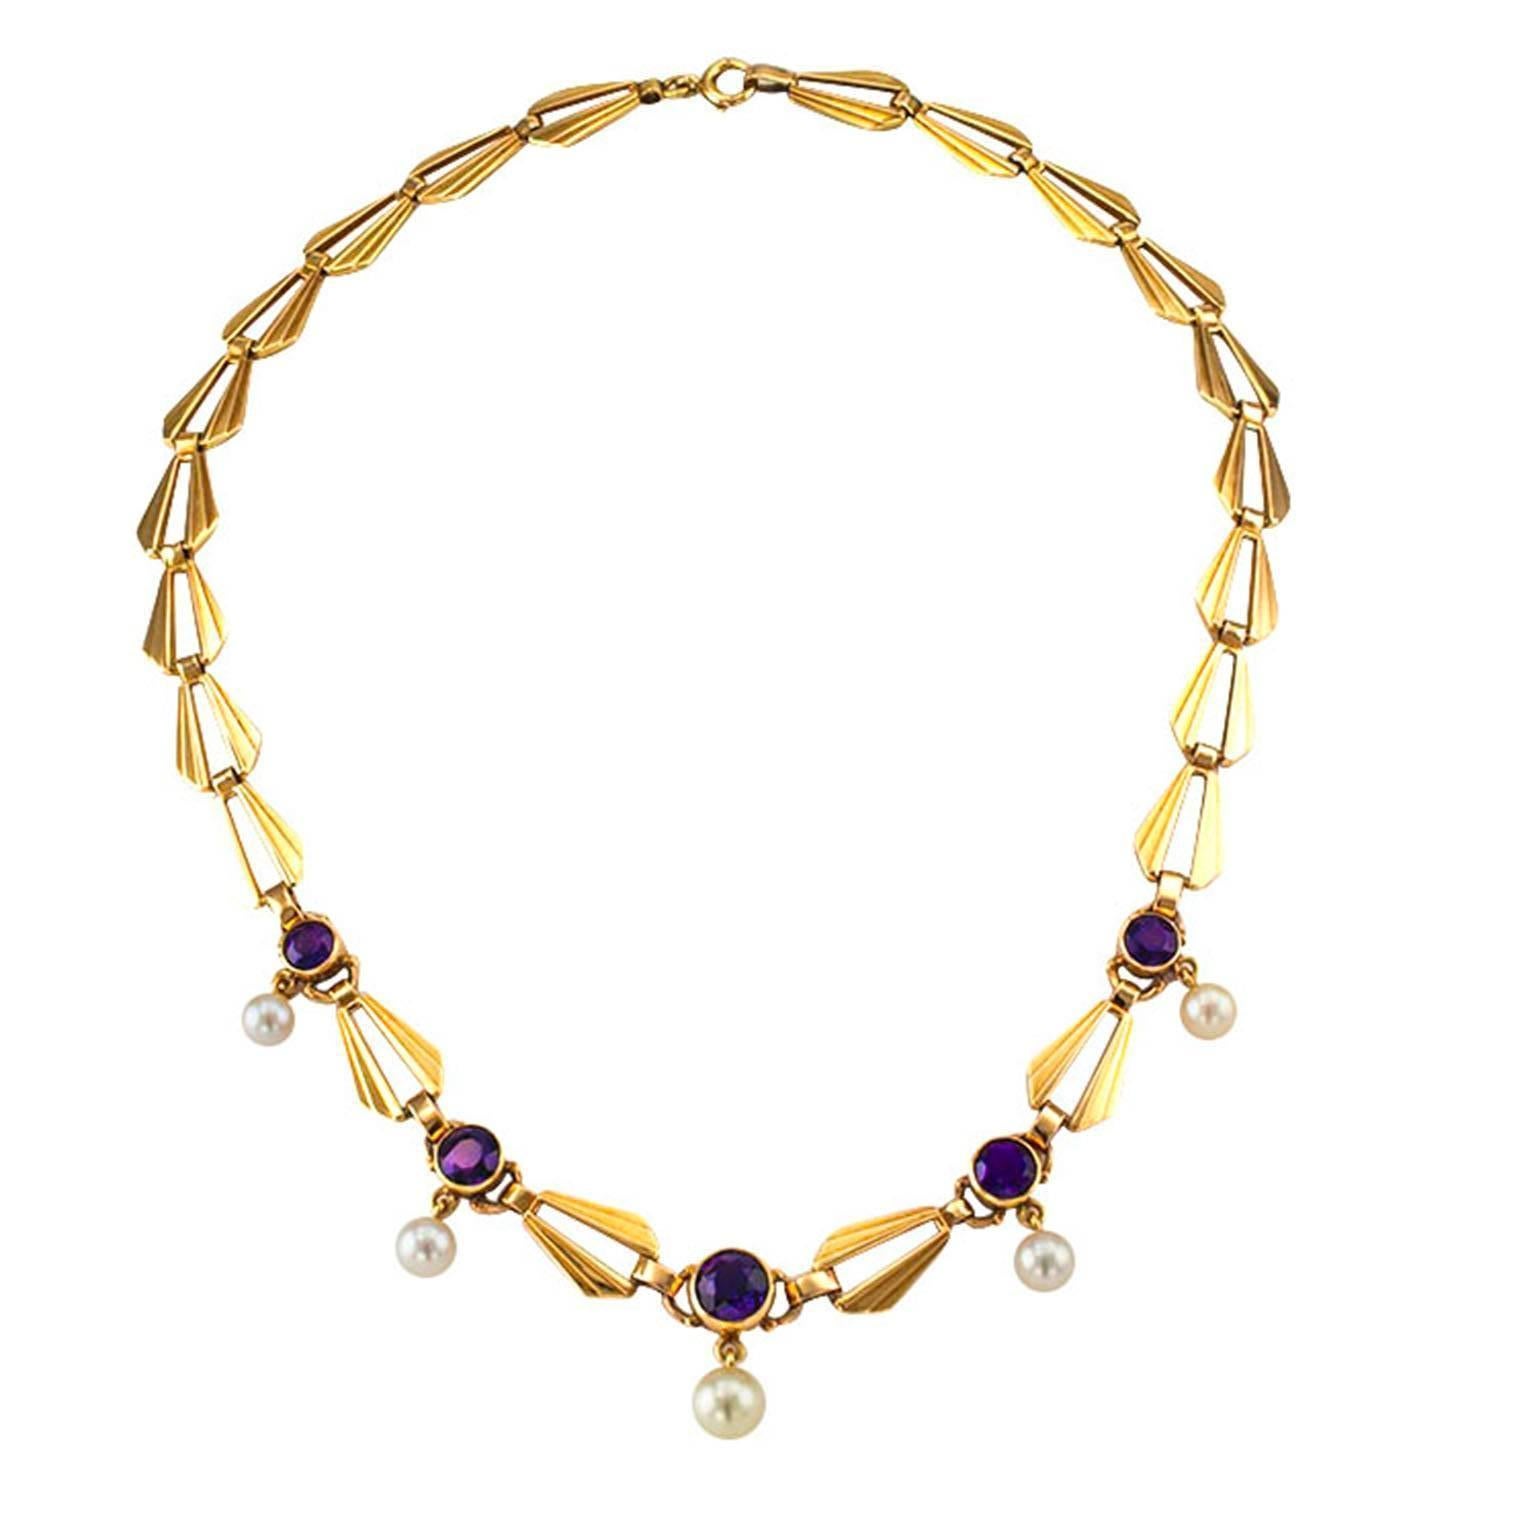 Retro Amethyst and Cultured Pearl Gold Necklace Circa 1950

Decorated on the front by five bezel-set round amethyst, each suspending a round cultured pearl ranging from 7 – 5.5 mm, connected by elongated, open and fluted links, mounted in 14-karat